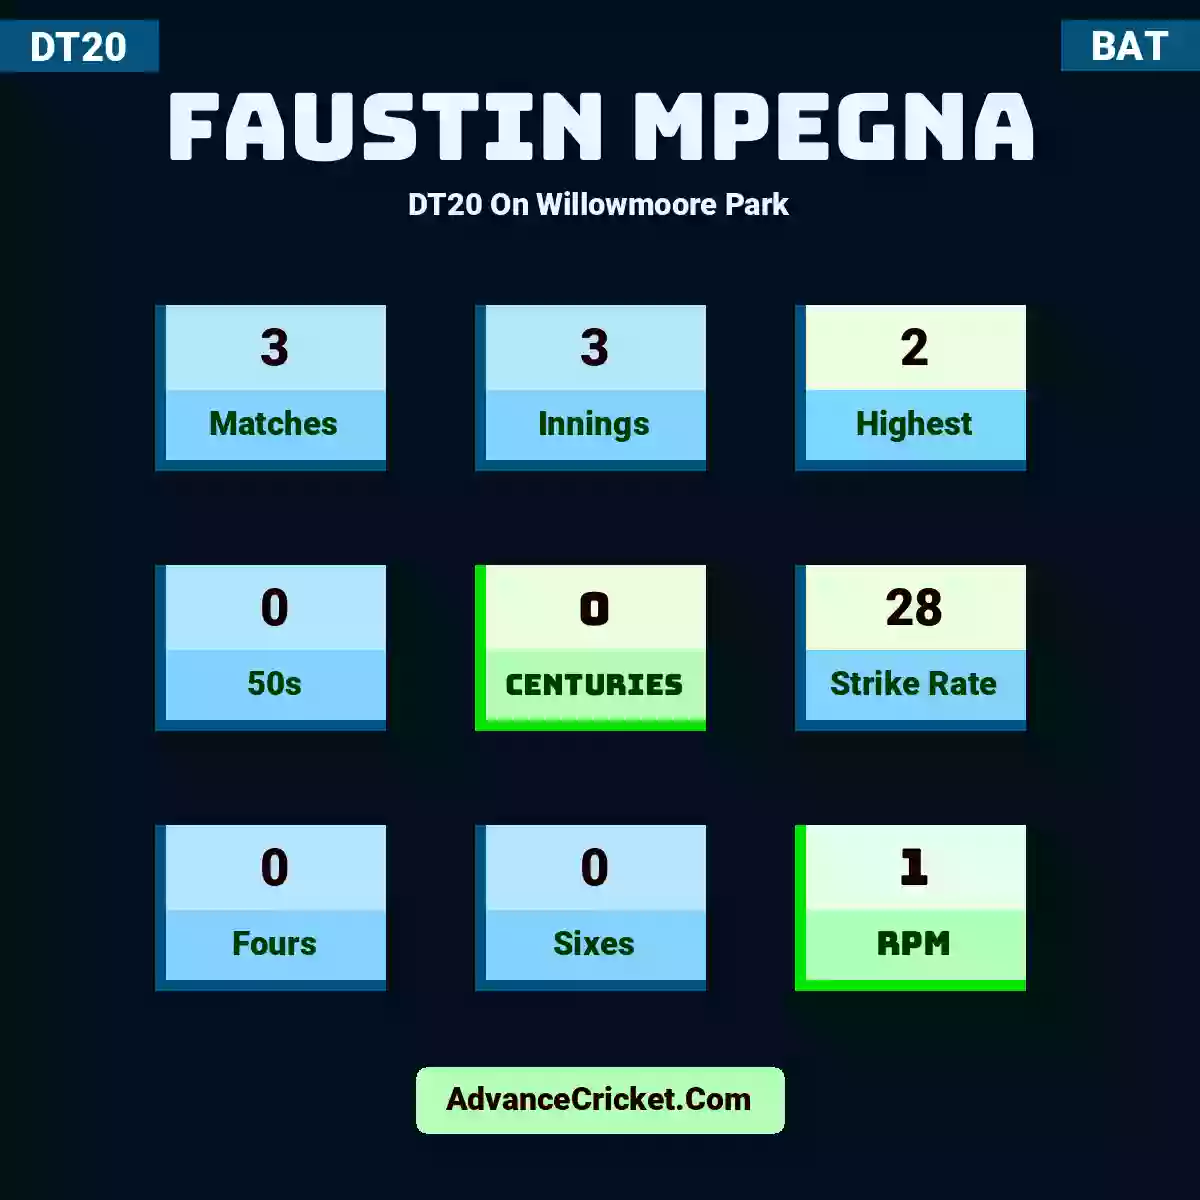 Faustin Mpegna DT20  On Willowmoore Park, Faustin Mpegna played 3 matches, scored 2 runs as highest, 0 half-centuries, and 0 centuries, with a strike rate of 28. F.Mpegna hit 0 fours and 0 sixes, with an RPM of 1.